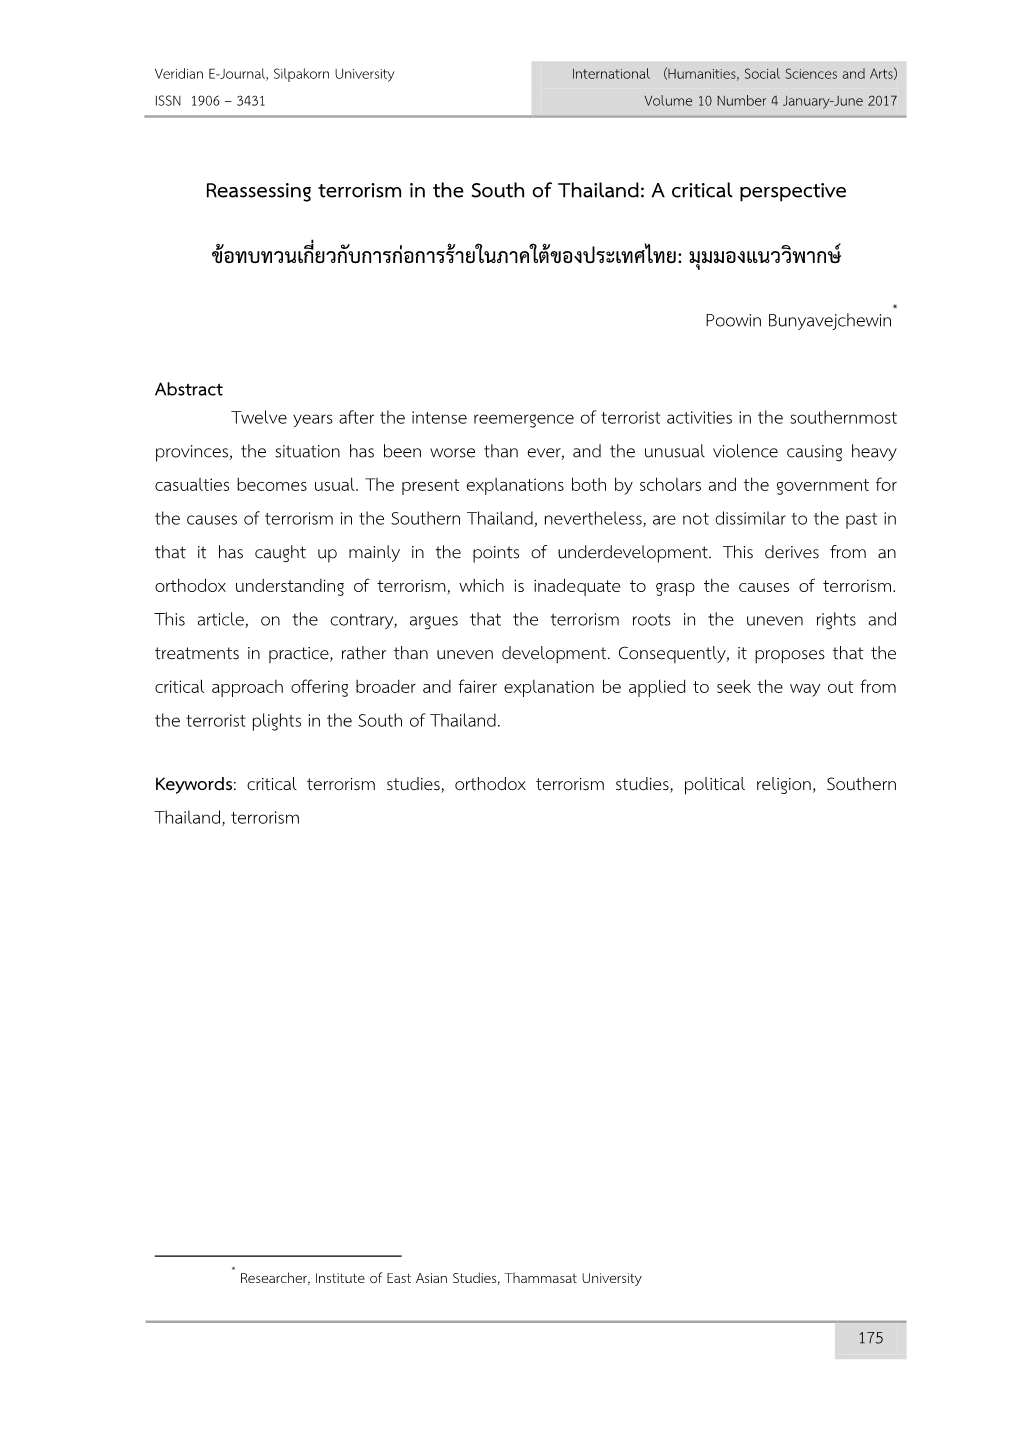 Reassessing Terrorism in the South of Thailand: a Critical Perspective ข้อทบทวนเกี่ยวกับกา